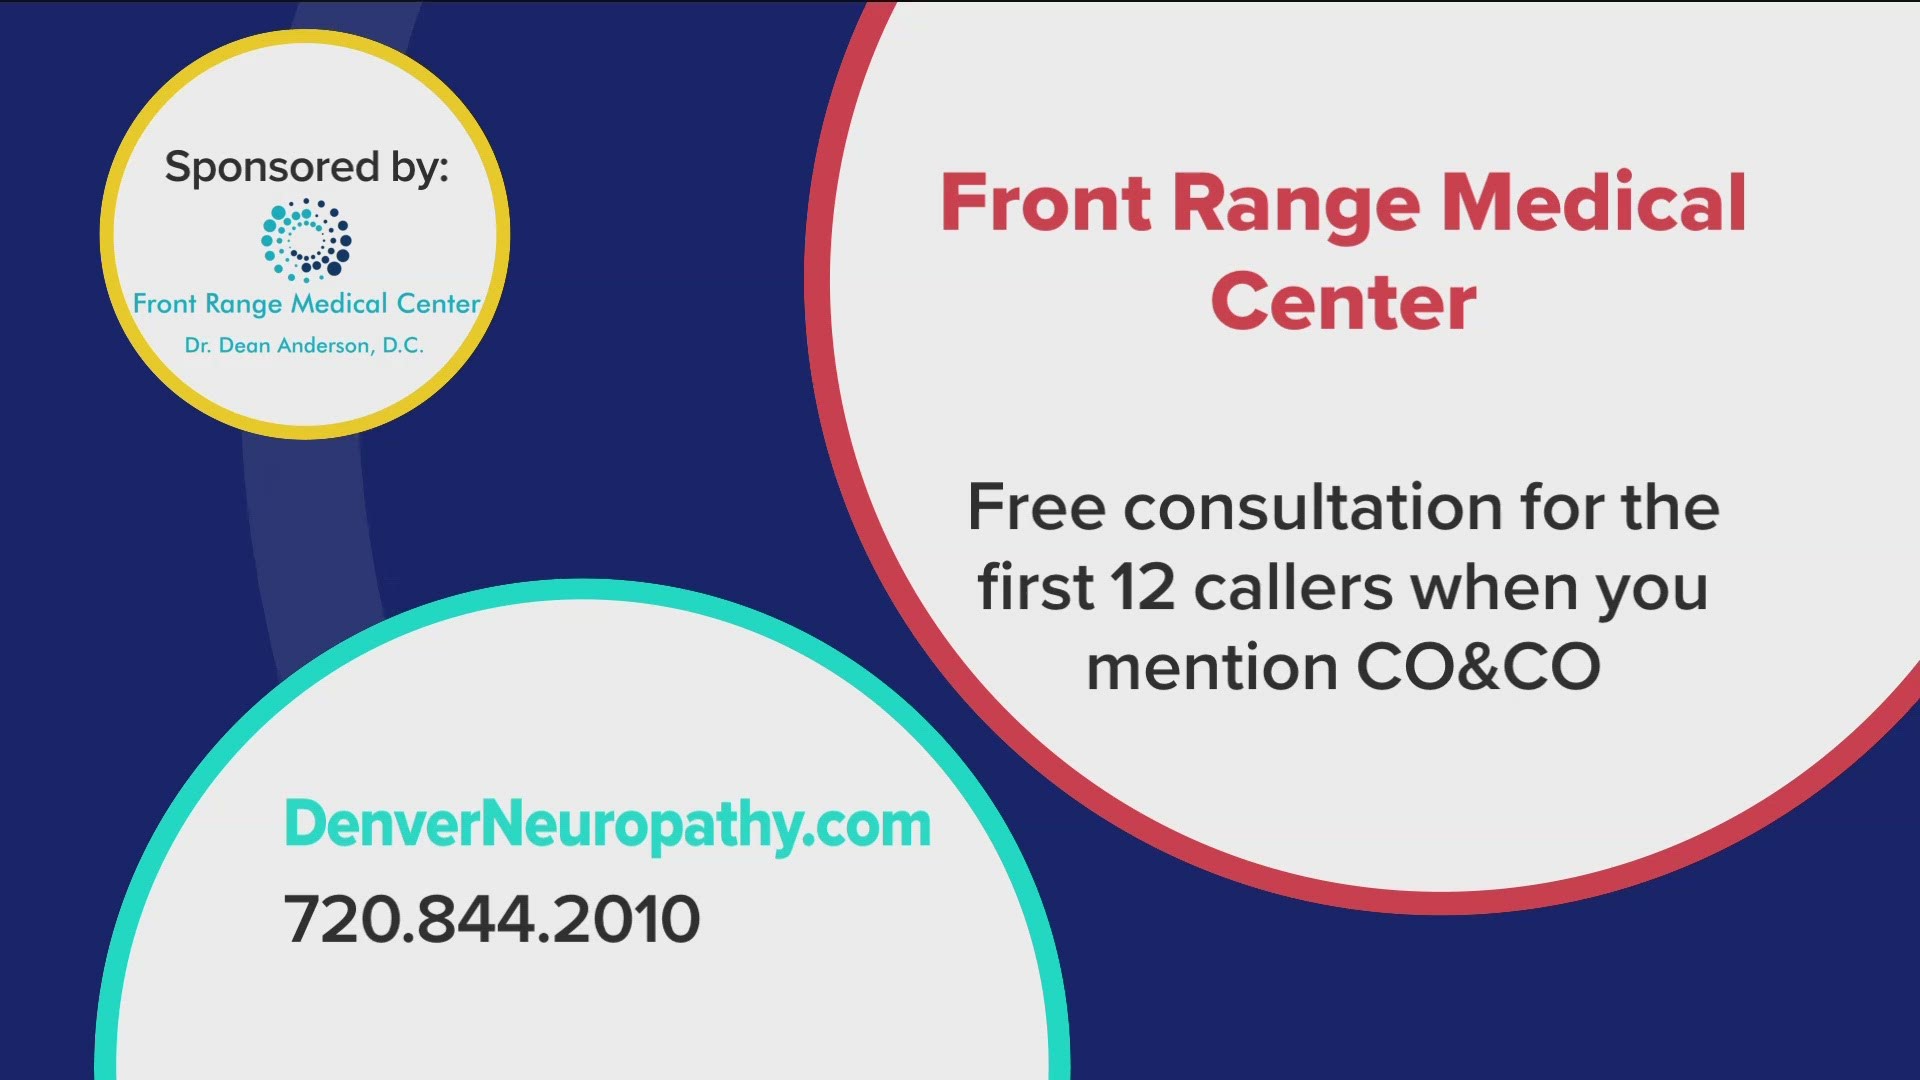 The first 12 to call 720.844.2010 will qualify for a free consultation. Learn more at DenverNeuropathy.com. **PAID CONTENT**